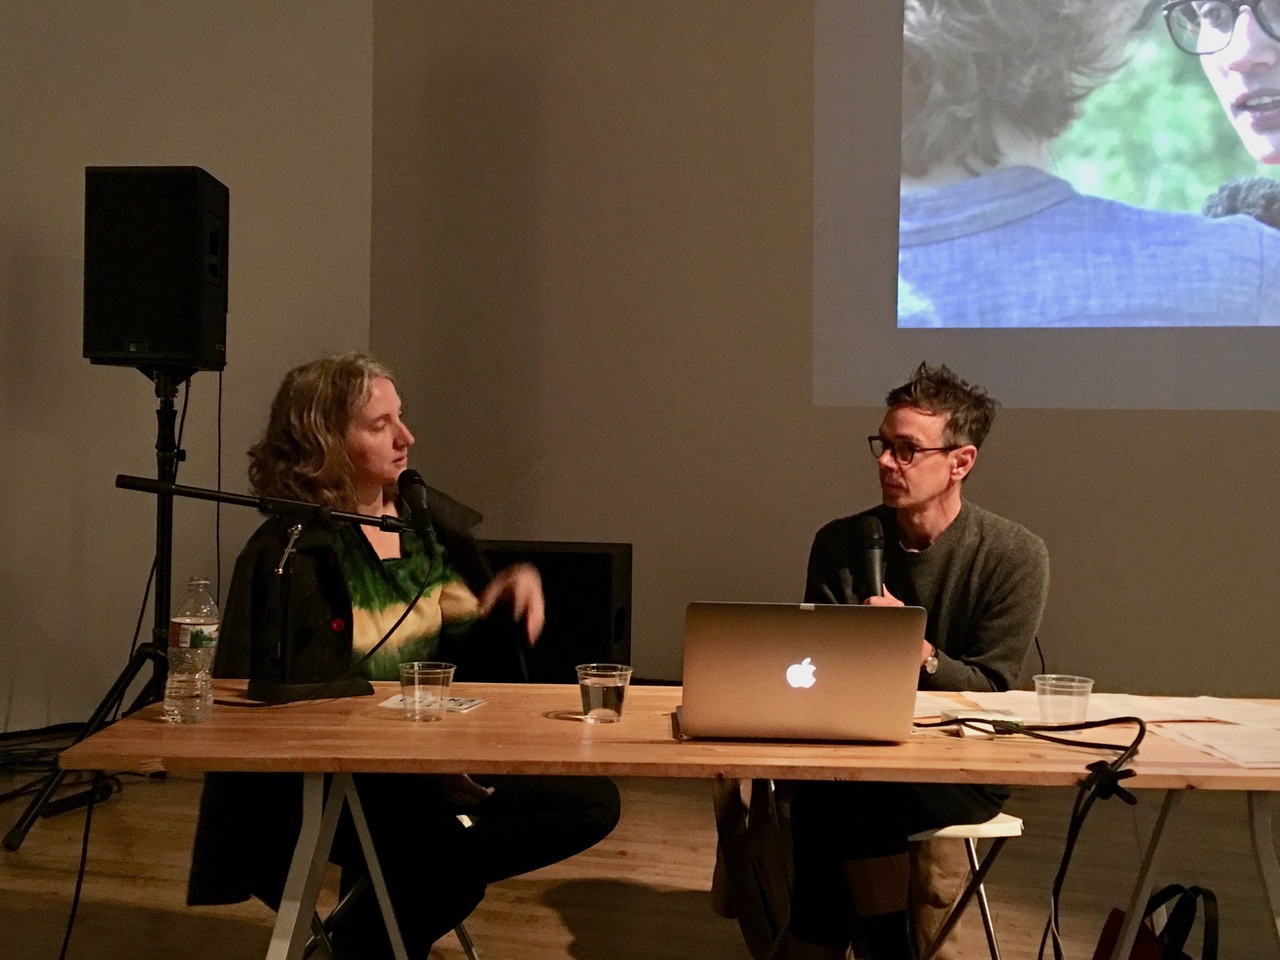  Sharon Hayes in conversation with James Voorhies, March 5, 2018. The Lab, San Francisco. 